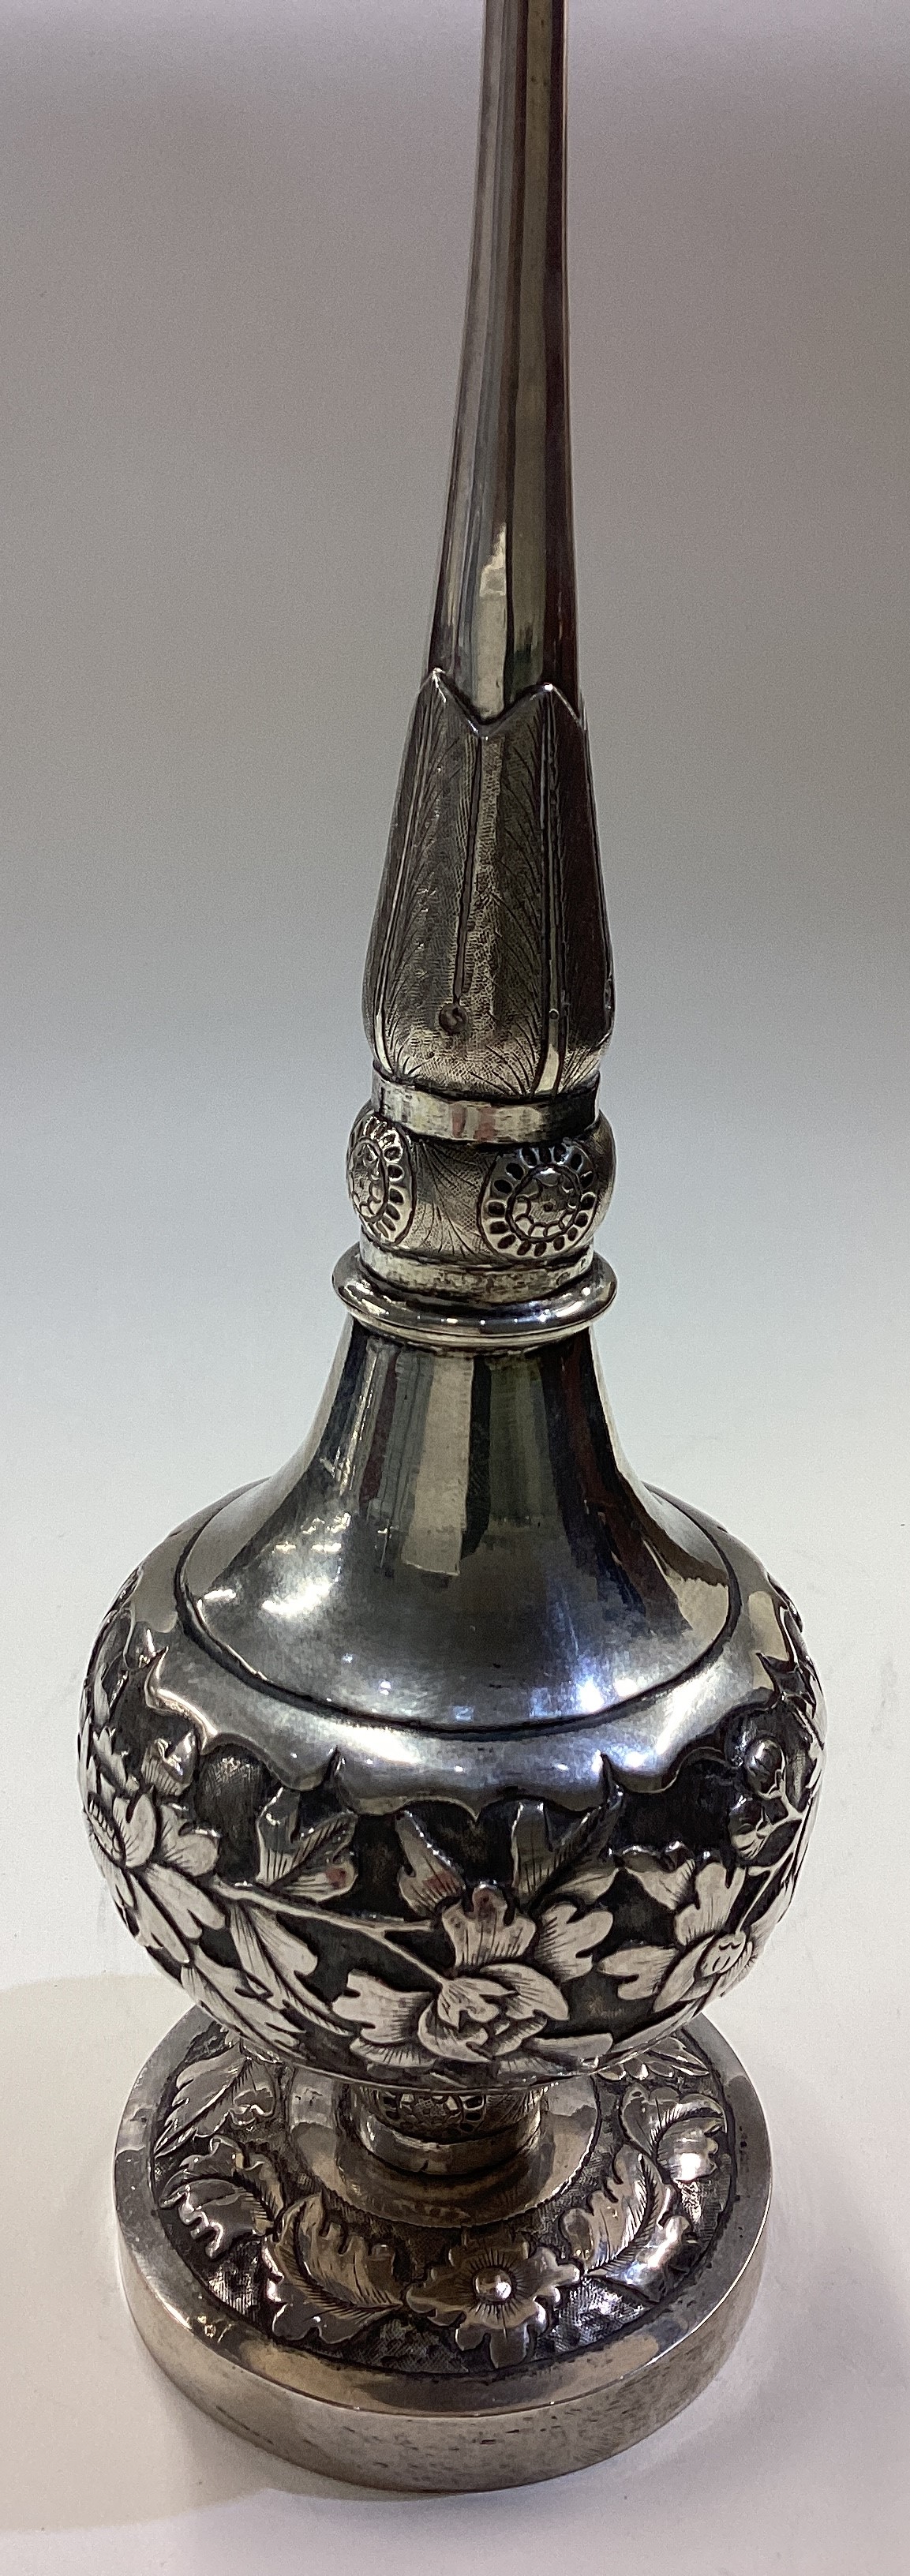 A large early 19th Century Chinese silver rose water sprinkler. - Image 4 of 4